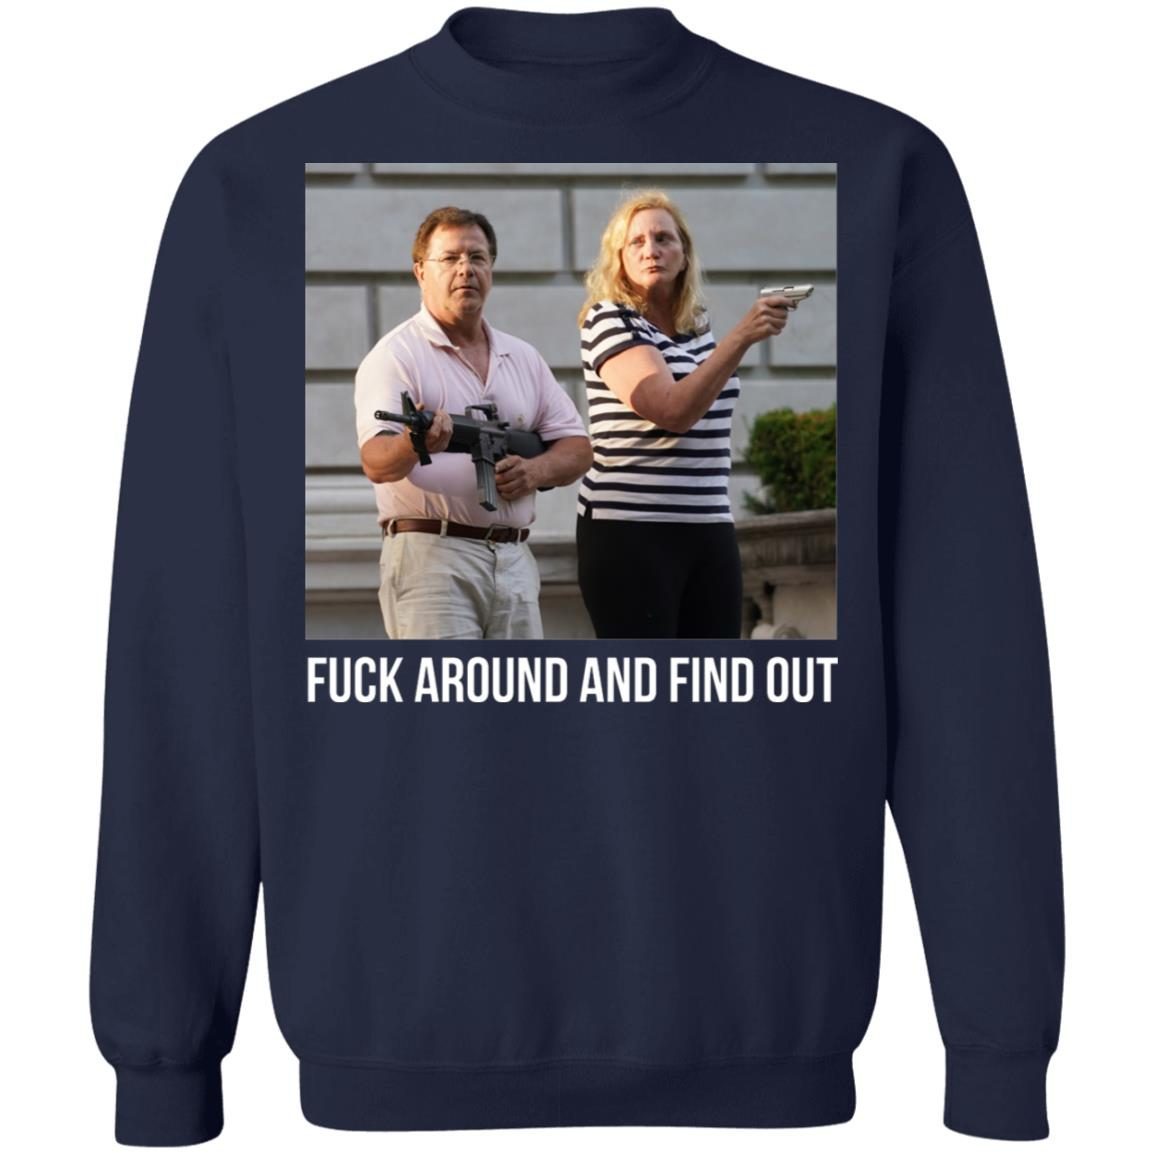 ST Louis couple fuck around and find out shirt